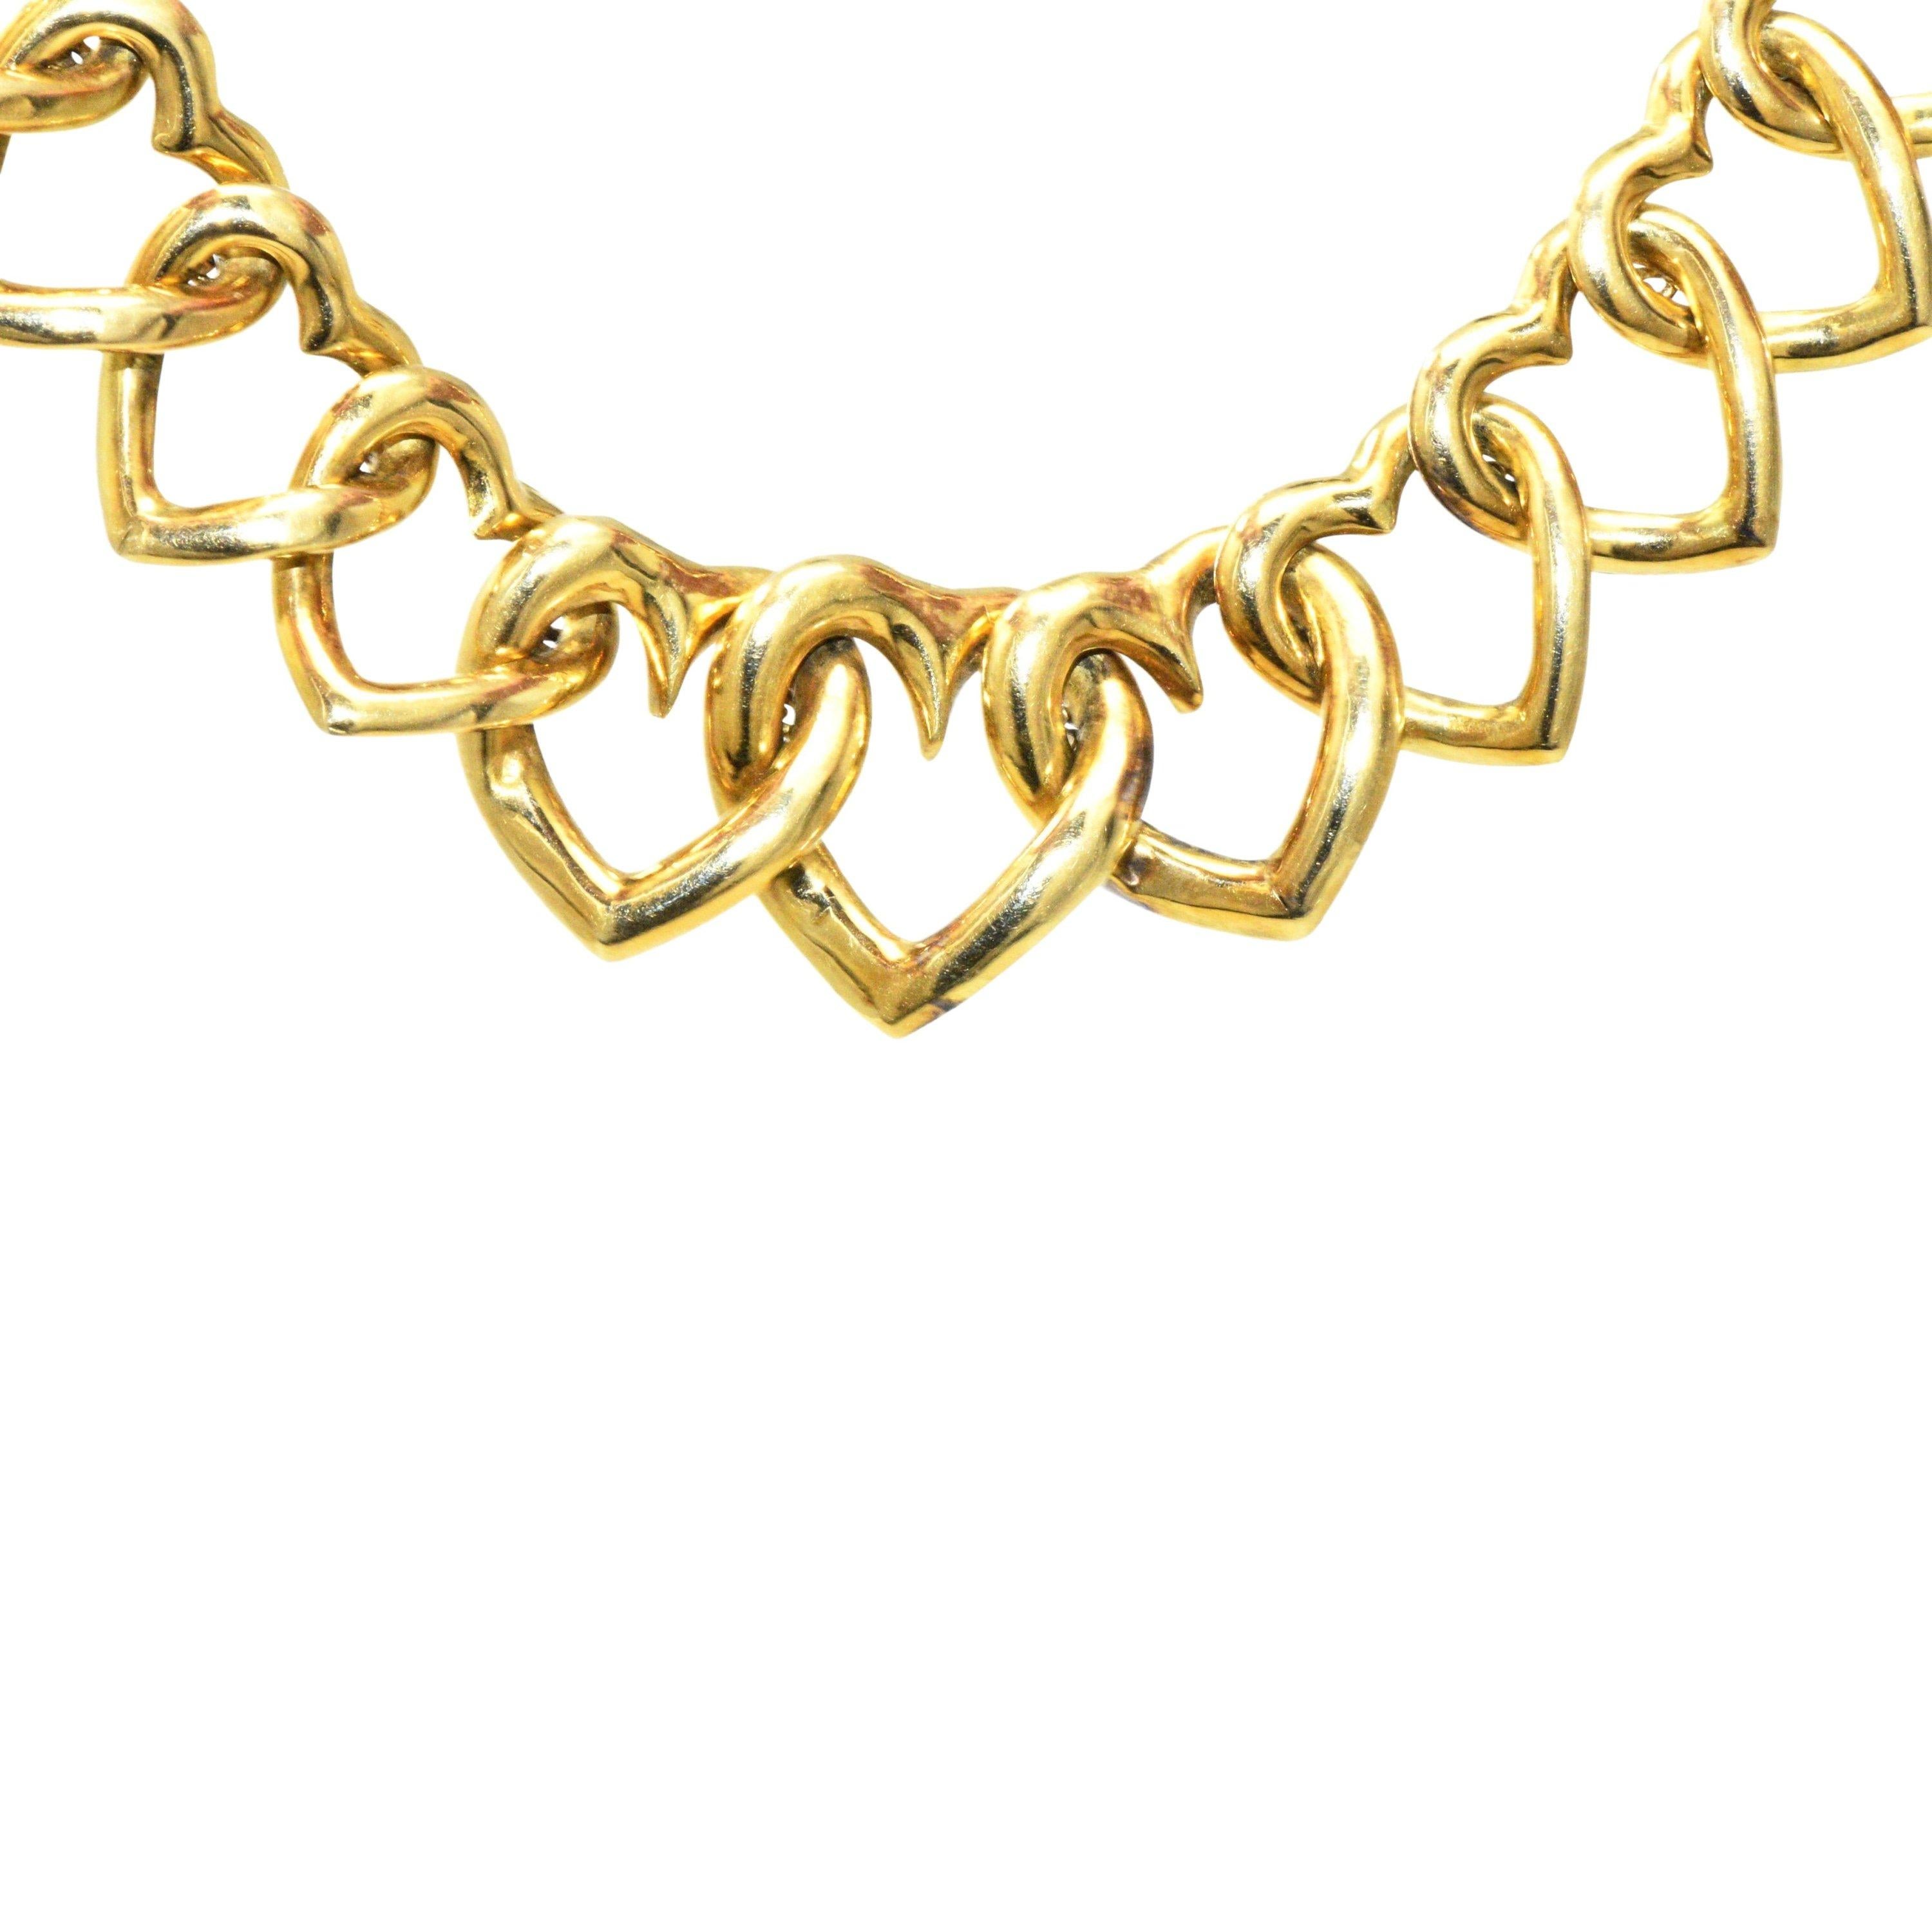 Link style necklace comprised of polished gold open hearts; graduating in size

Completed by concealed clasp with figure eight safety

Signed VCA NY 4V40-2 

Stamped Italy 18KT for 18 karat Italian gold

Length: 17 1/2 inches 

Width: tapers from